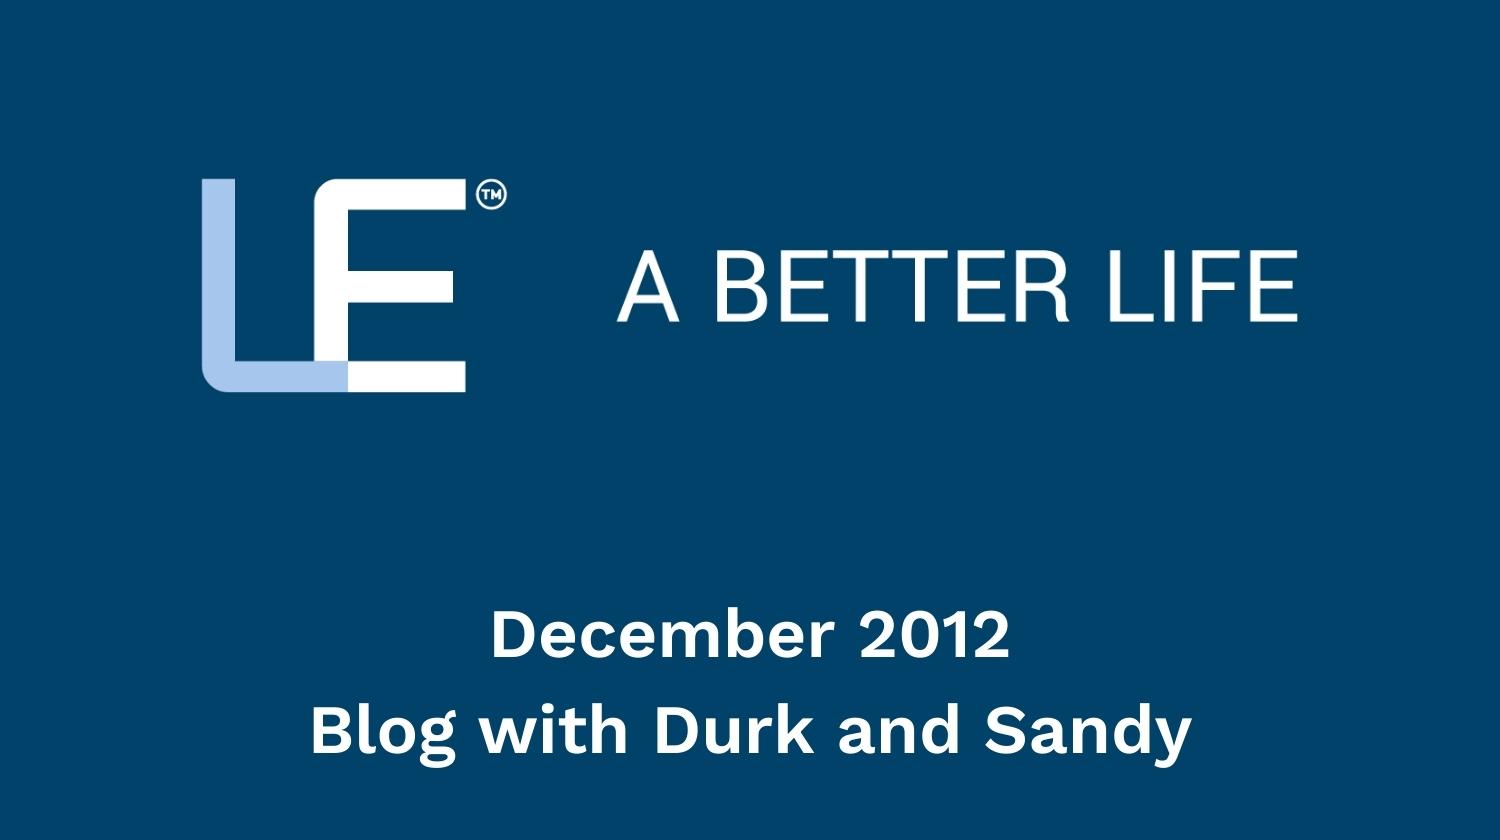 December 2012 Blog with Durk and Sandy